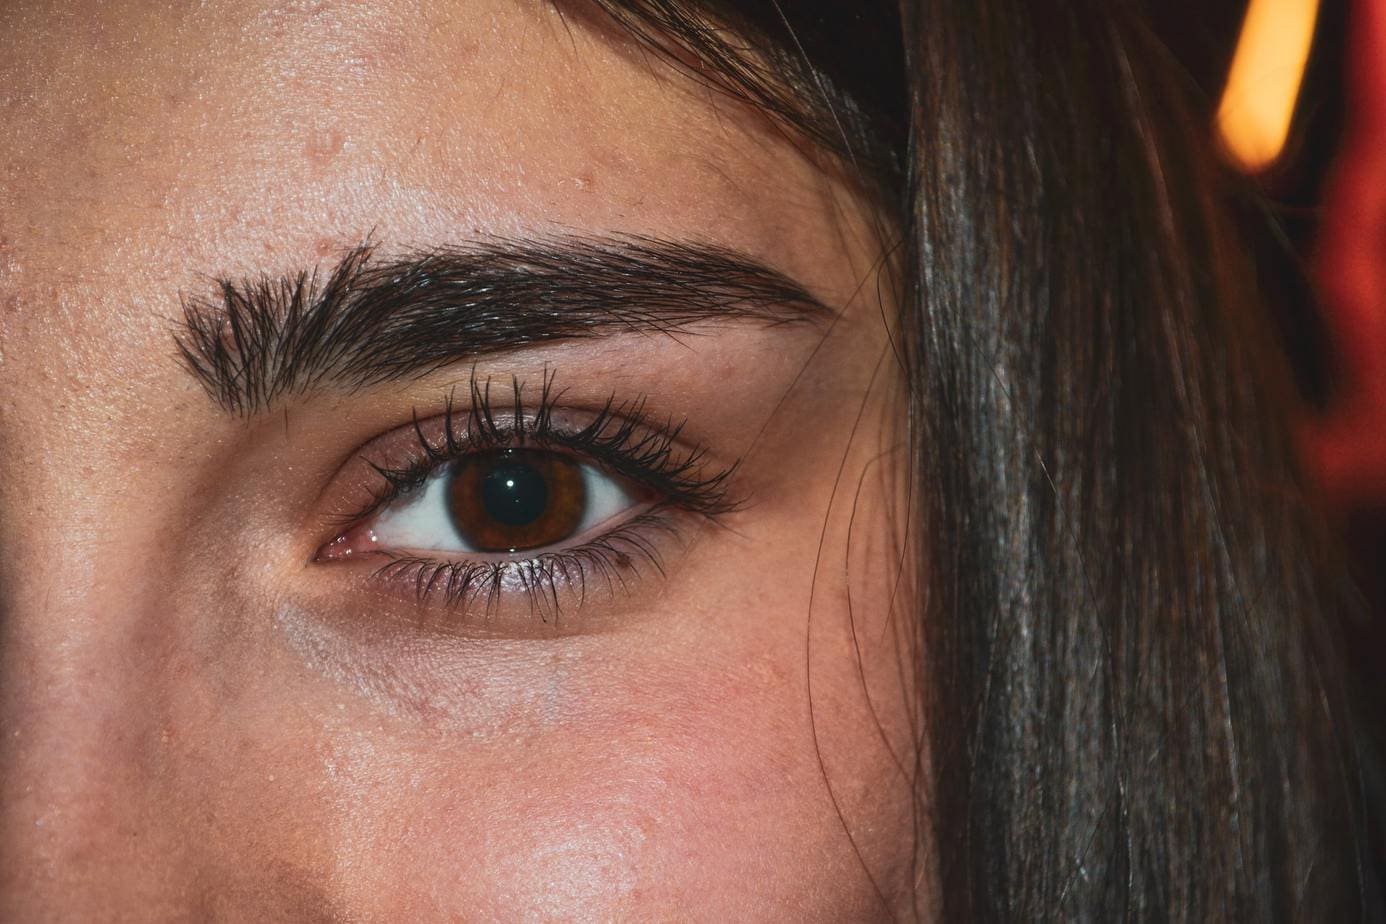 How to give your eyelashes and eyebrows the perfect shape?